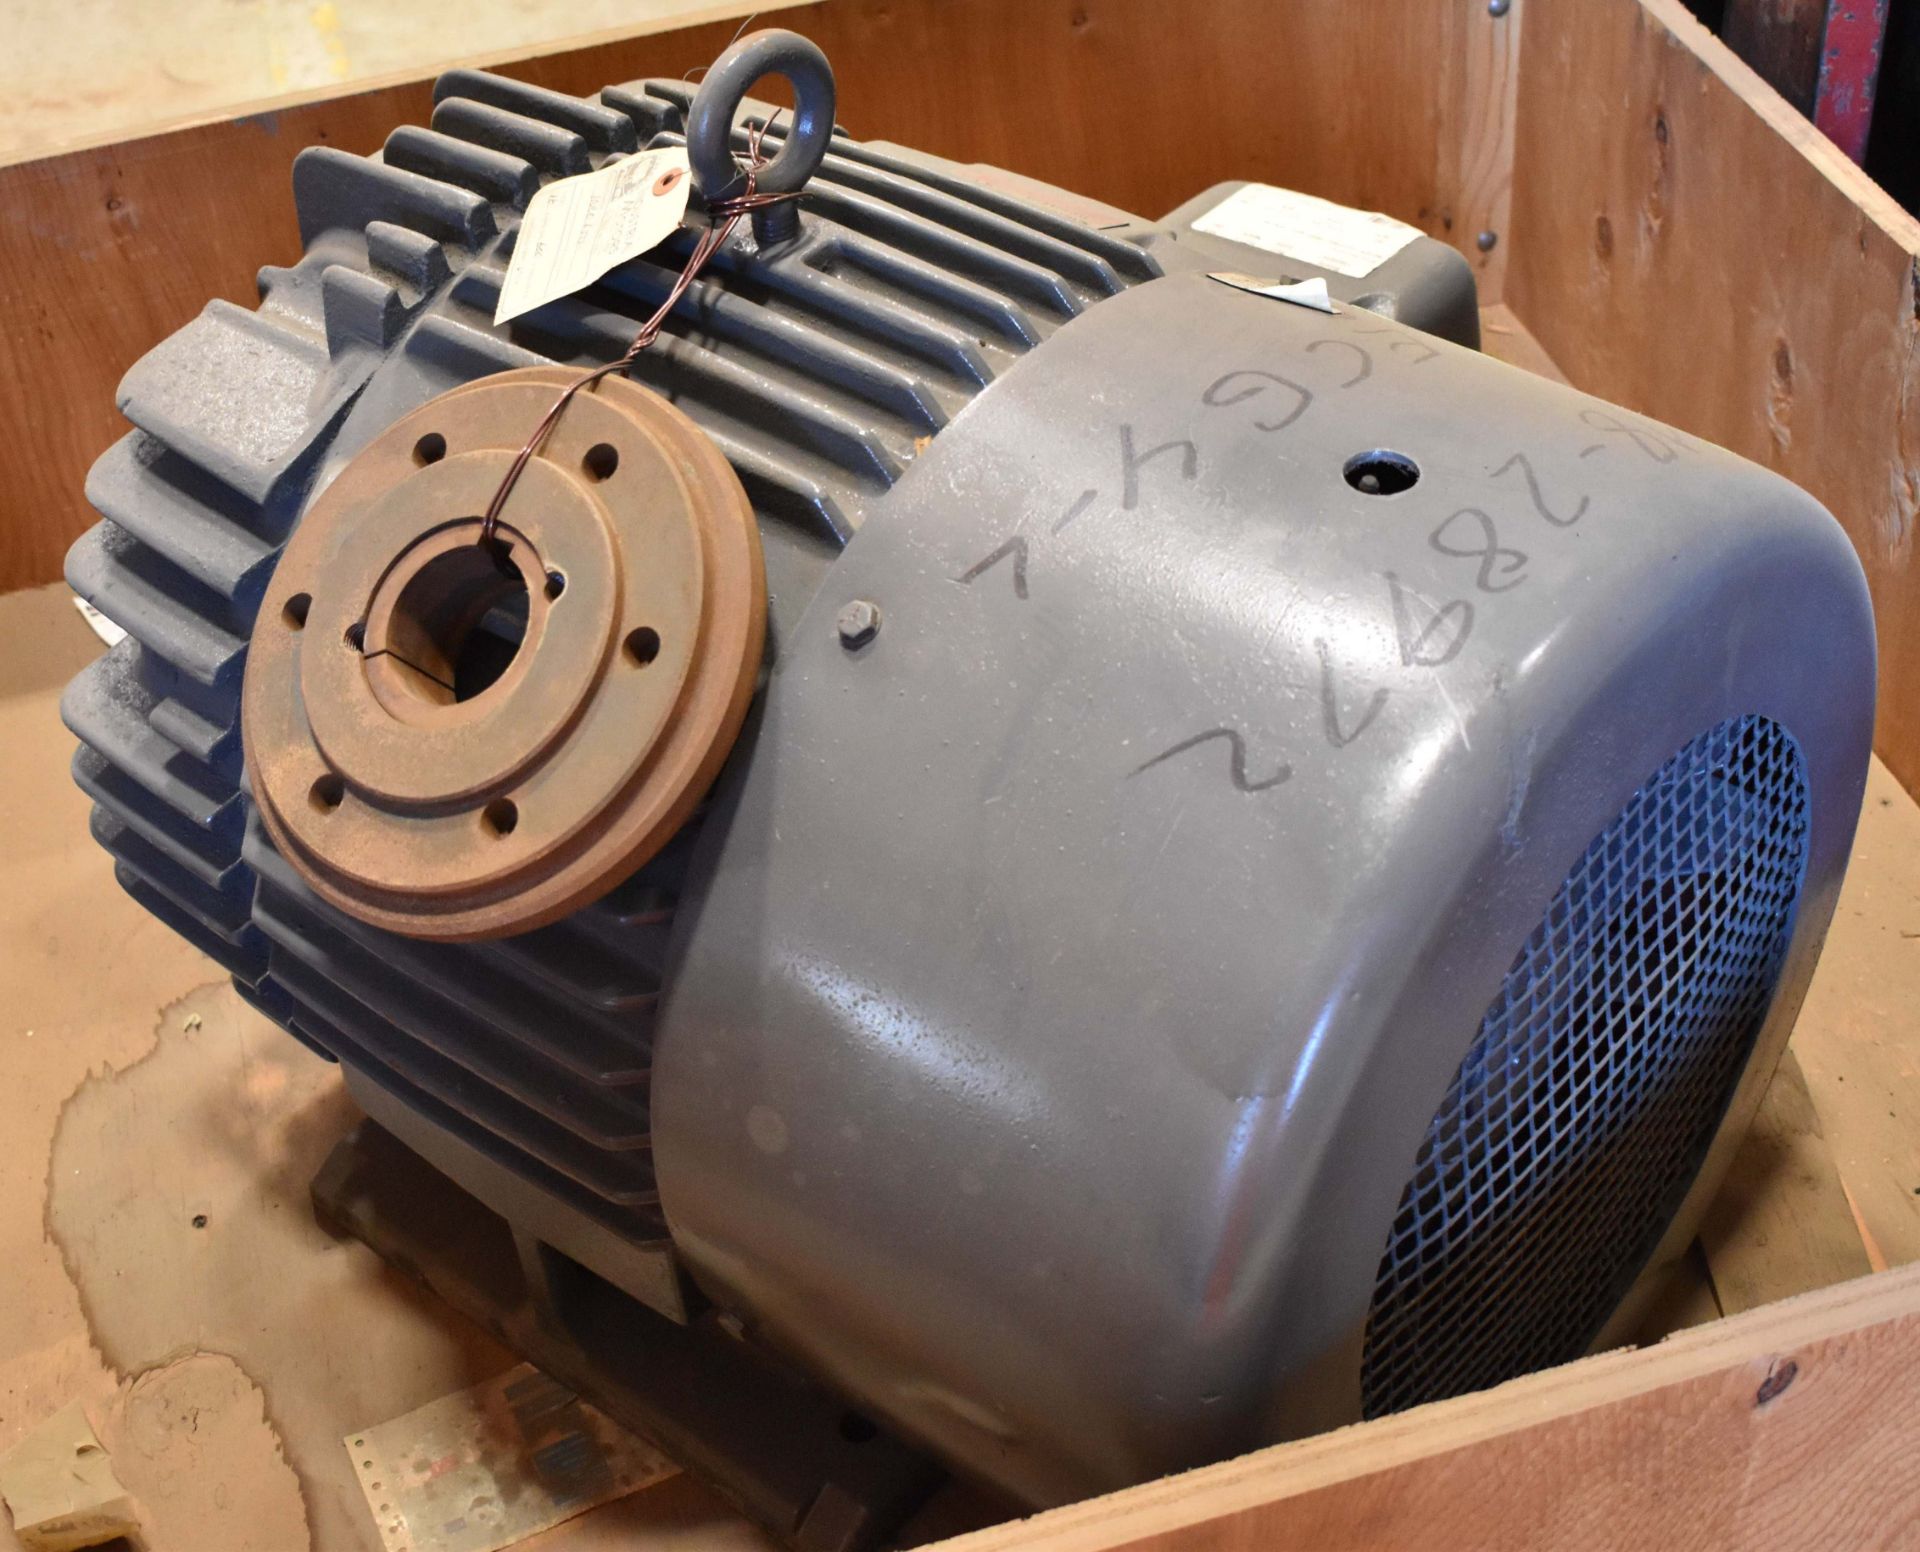 CANADIAN GENERAL ELECTRIC 20 HP ELECTRIC MOTOR WITH 575V, 3PH, 60HZ (CMD WAREHOUSE - 10070302) - Image 2 of 3